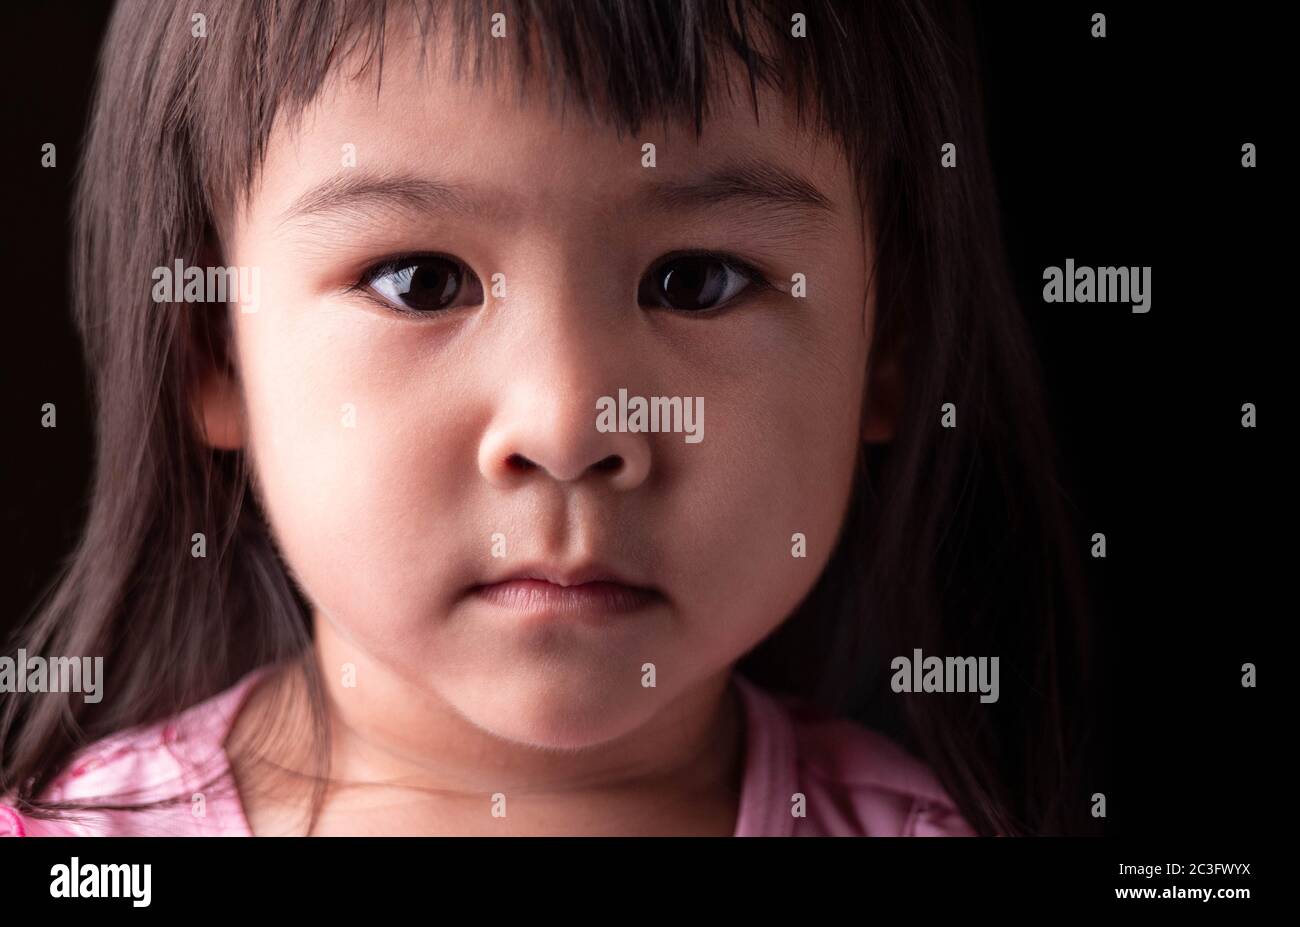 Portrait face of Asian little child girl with confidence expression on dark background. Stock Photo